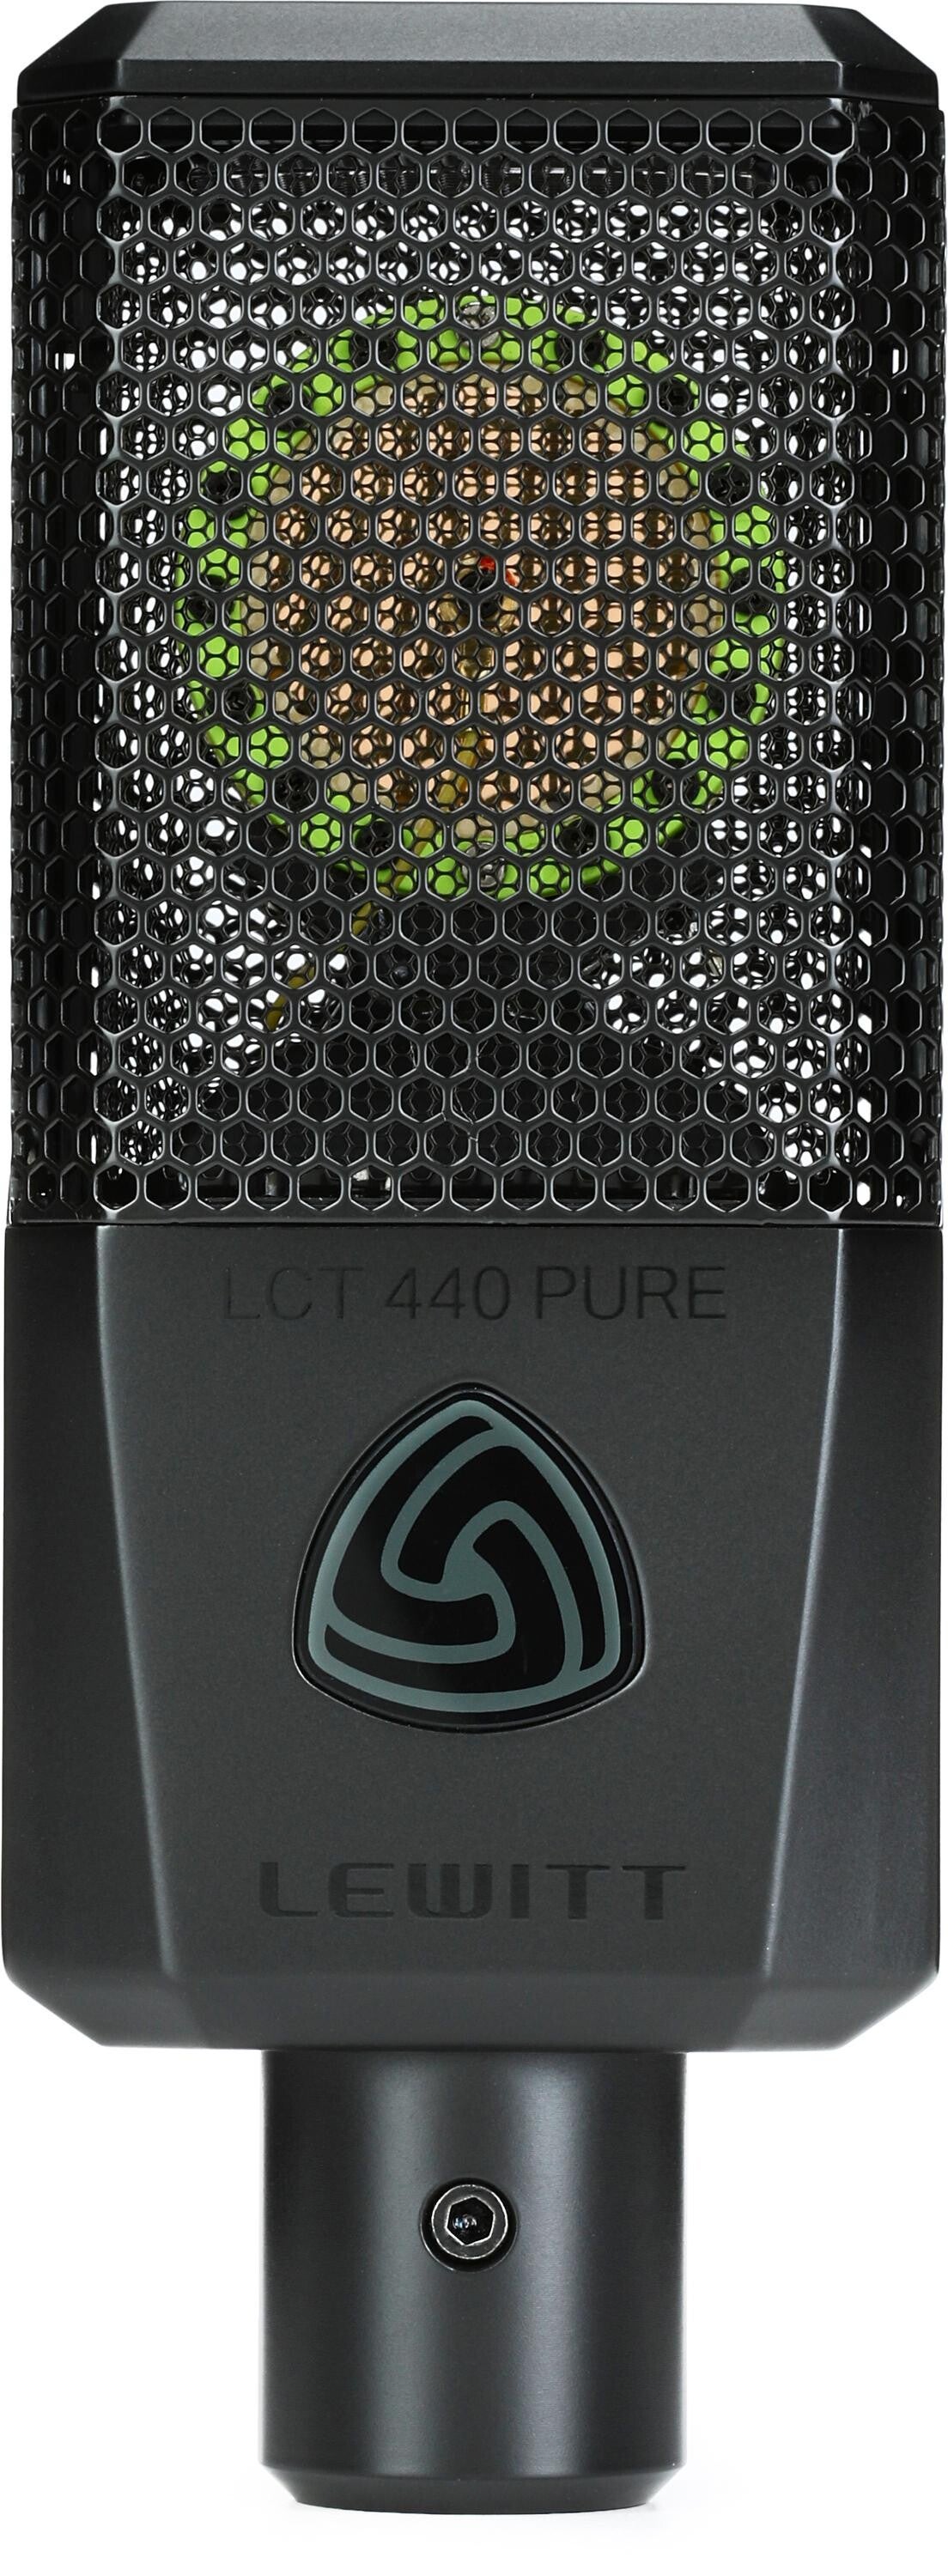 Lewitt LCT 440 PURE Condenser Microphone | Sweetwater